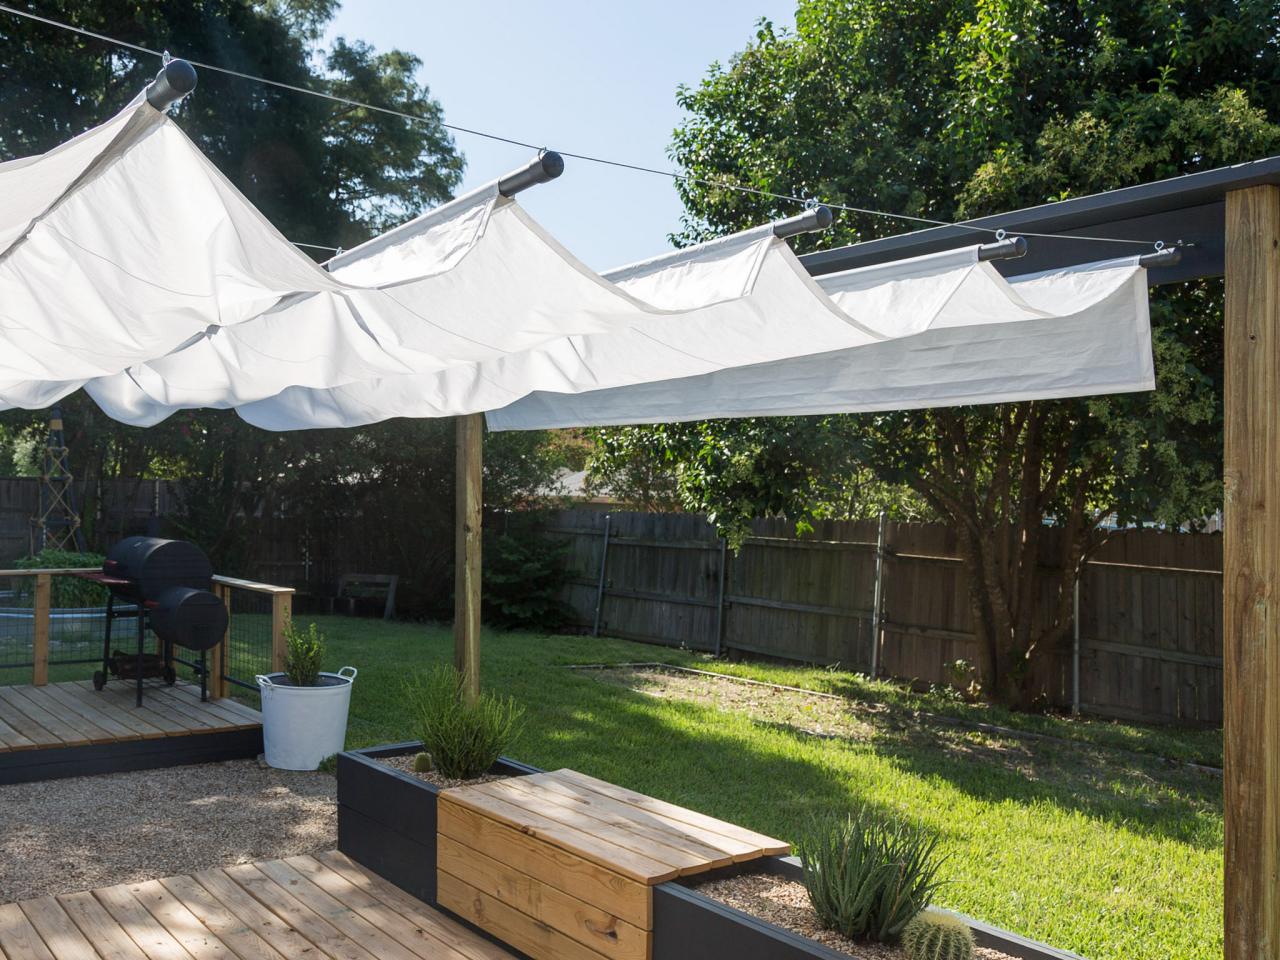 How To Build An Outdoor Canopy, How To Make Your Own Patio Canopy